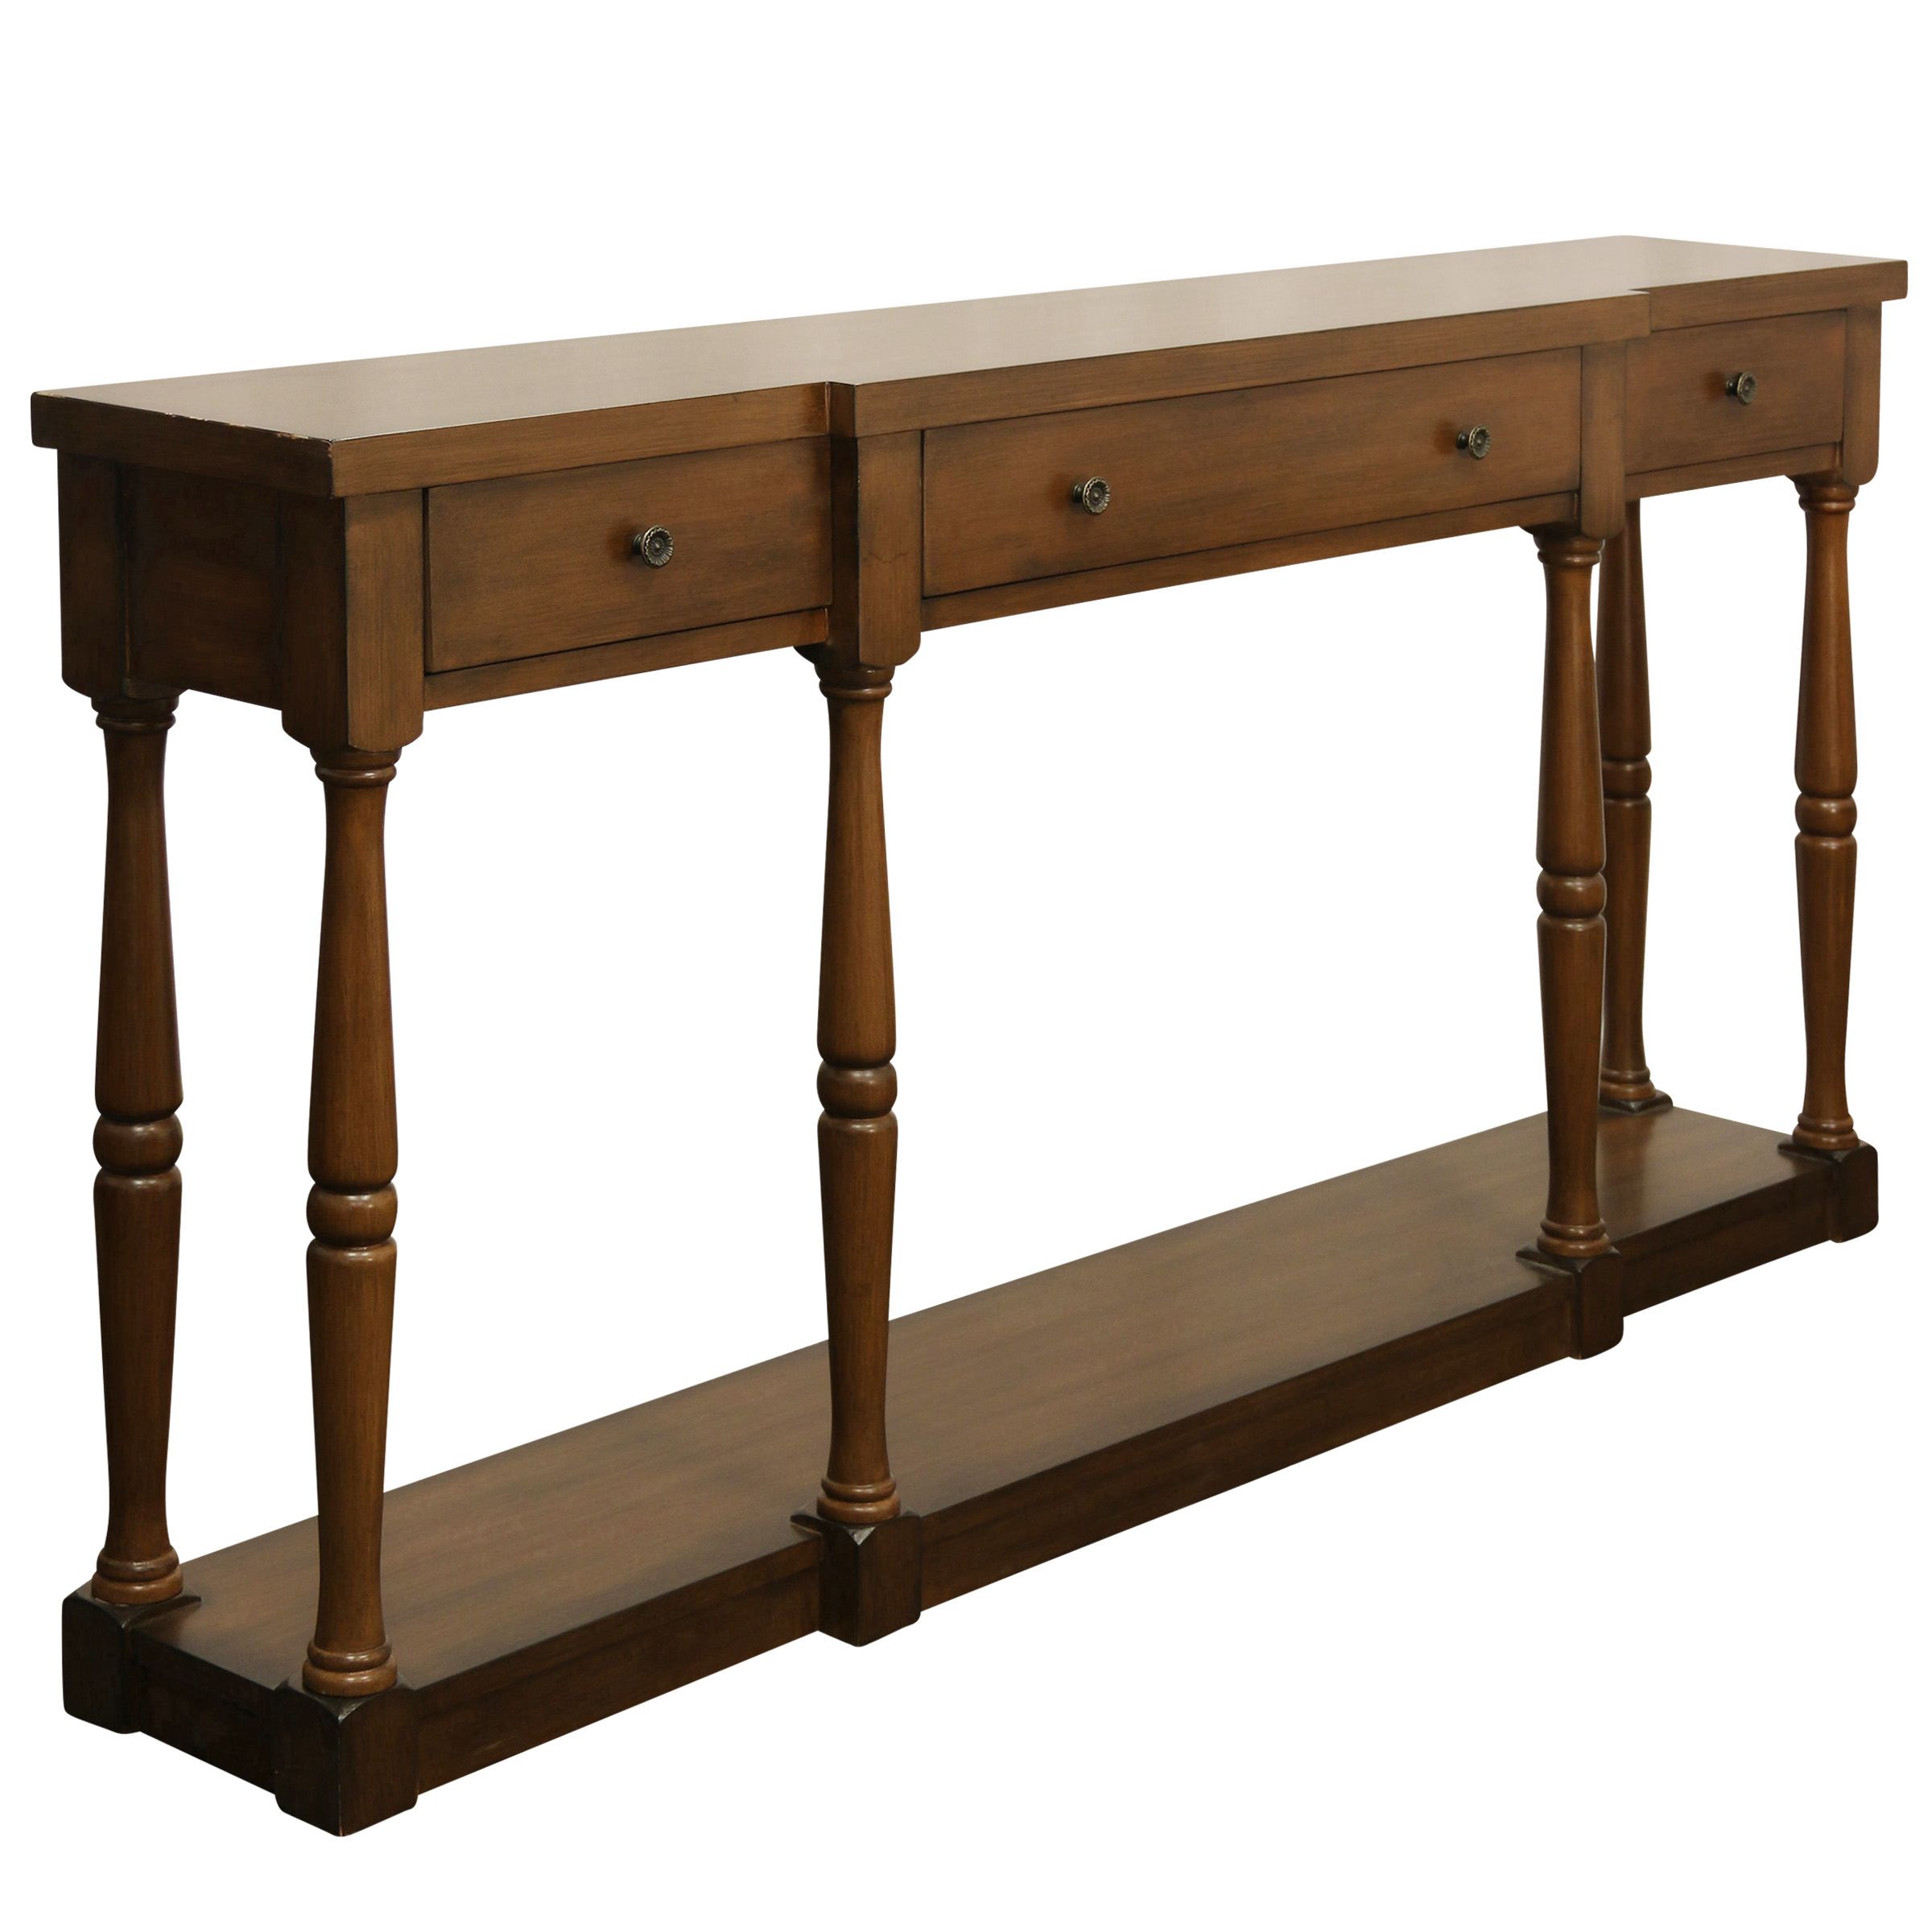 Springfield 3 Drawer Wood Console Table – Cherry Finish Regarding Heartwood Cherry Wood Console Tables (View 2 of 20)